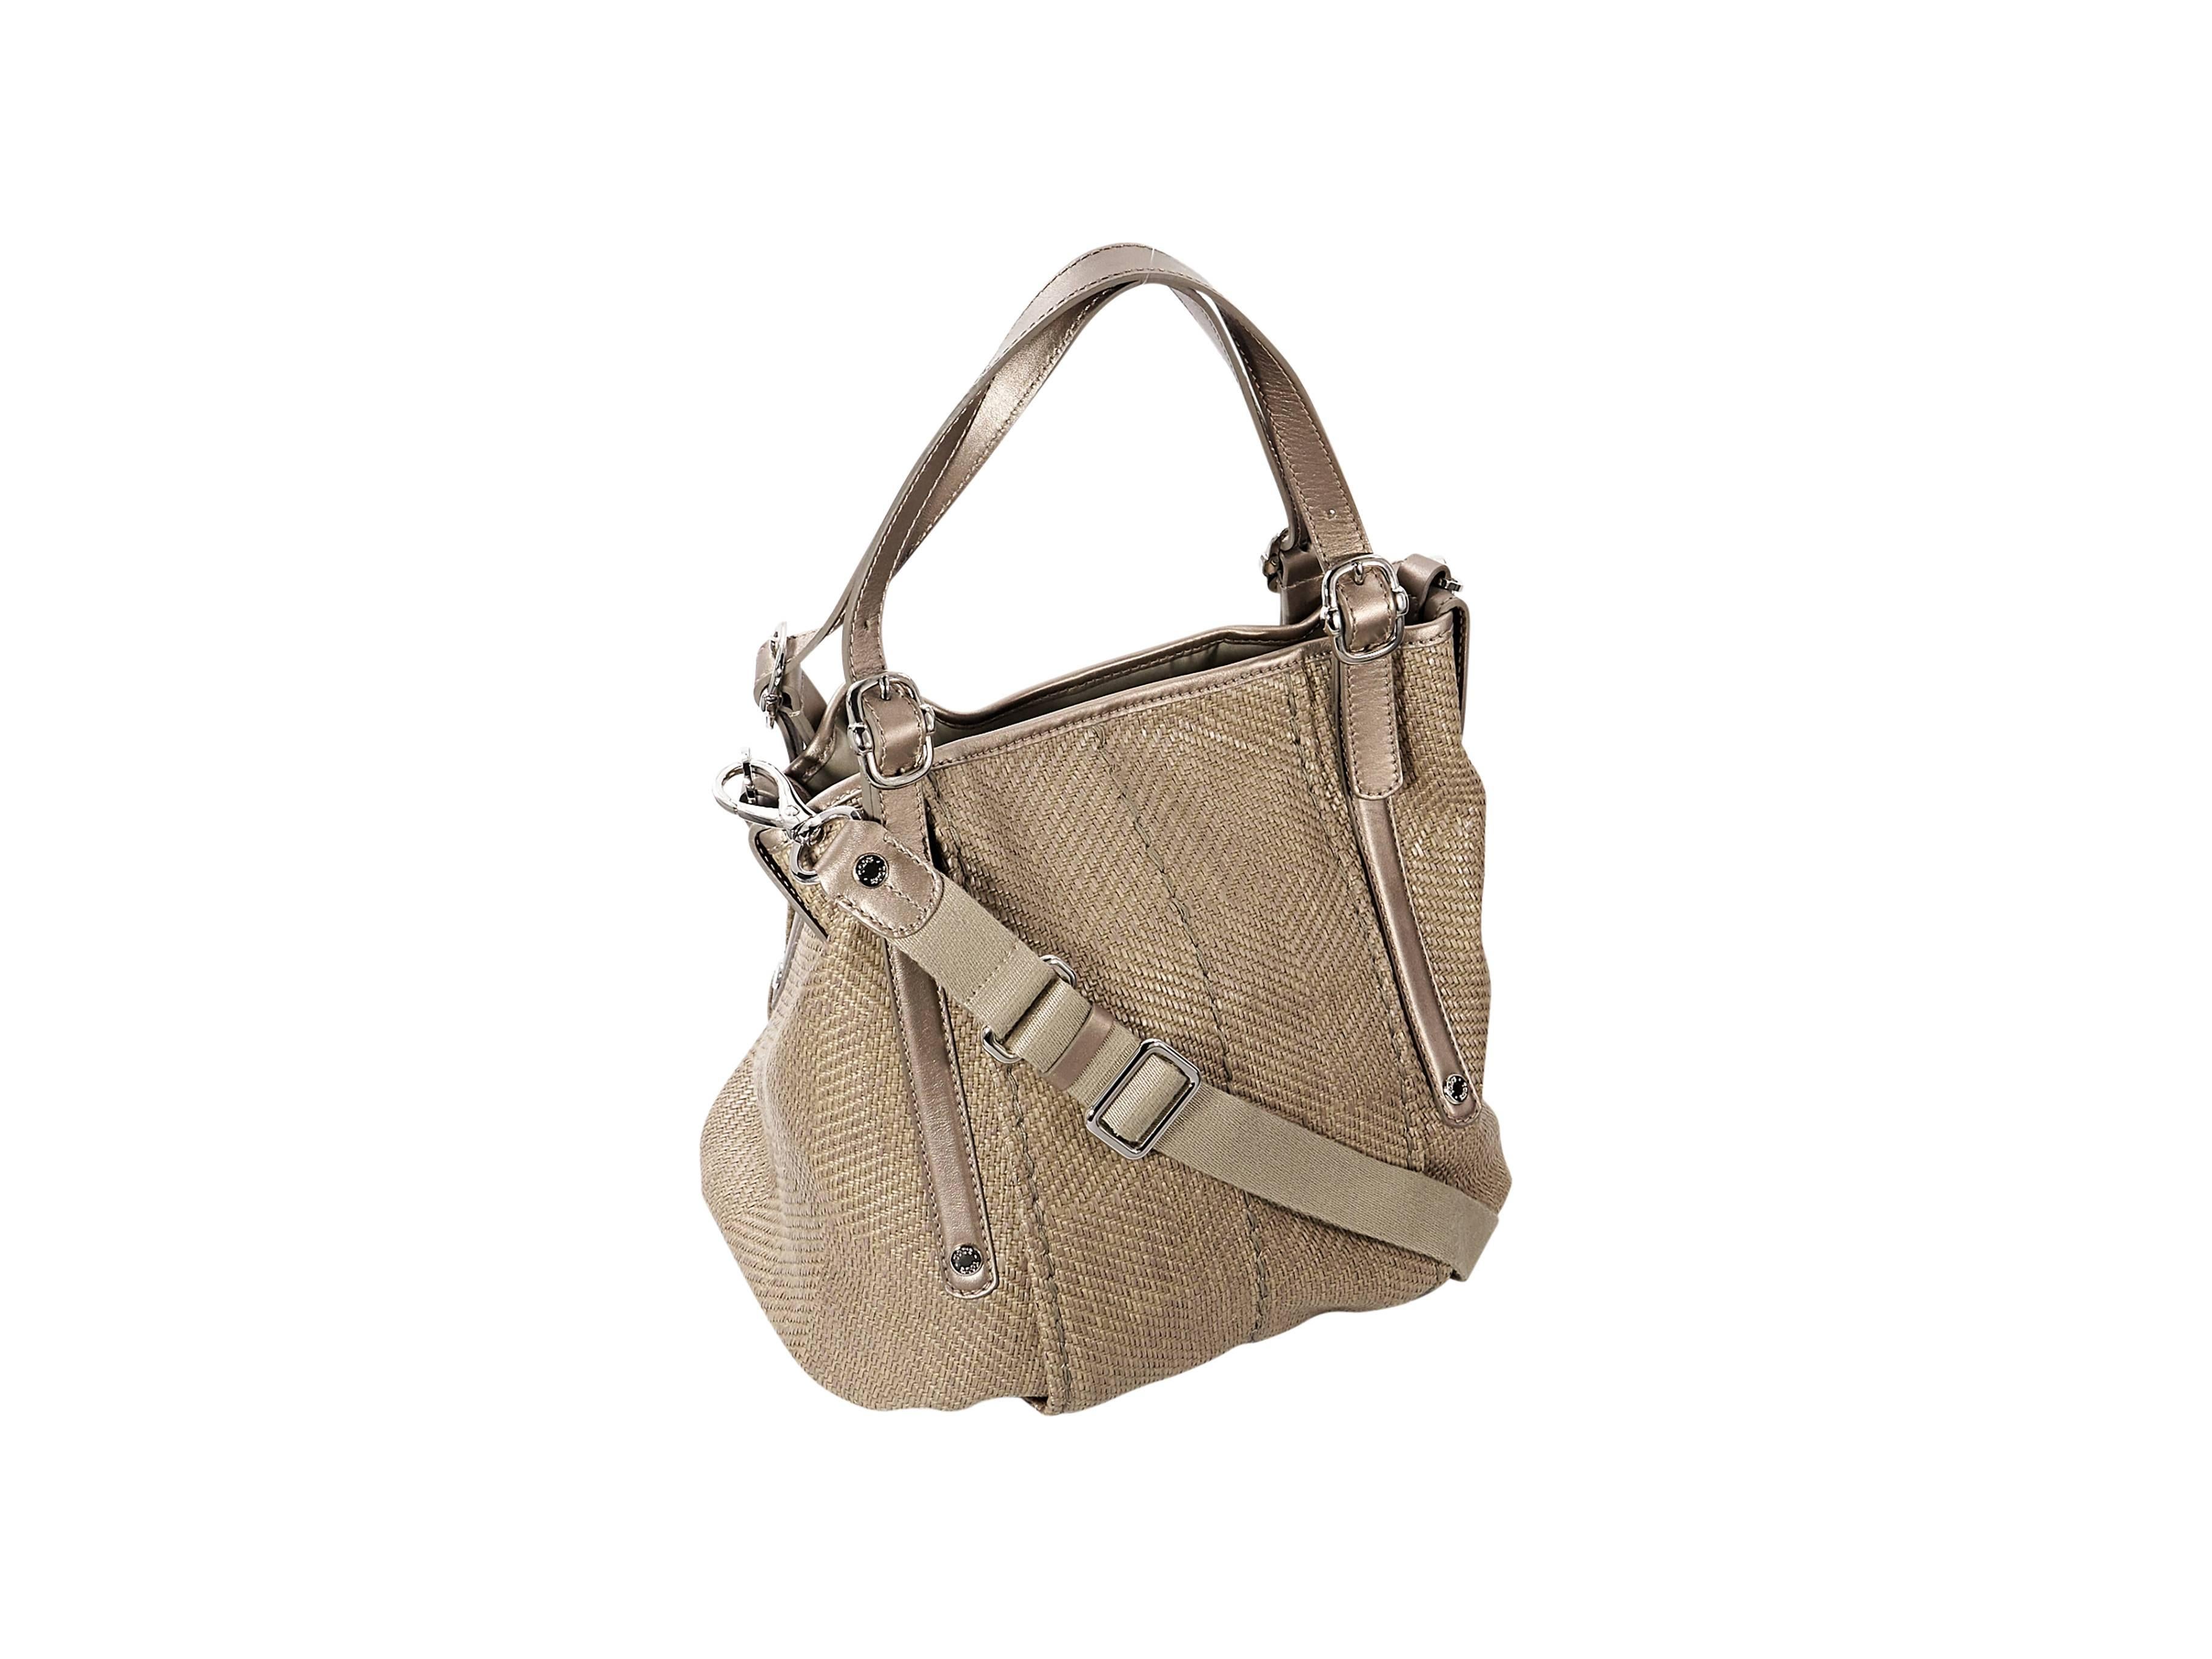 Product details: Tan woven satchel bag by Tod's. Trimmed with leather. Dual shoulder straps. Detachable, adjustable crossbody strap. Concealed snap closure. Lined interior with inner zip and slide pockets. Protective metal feet. Silverotne hardware.